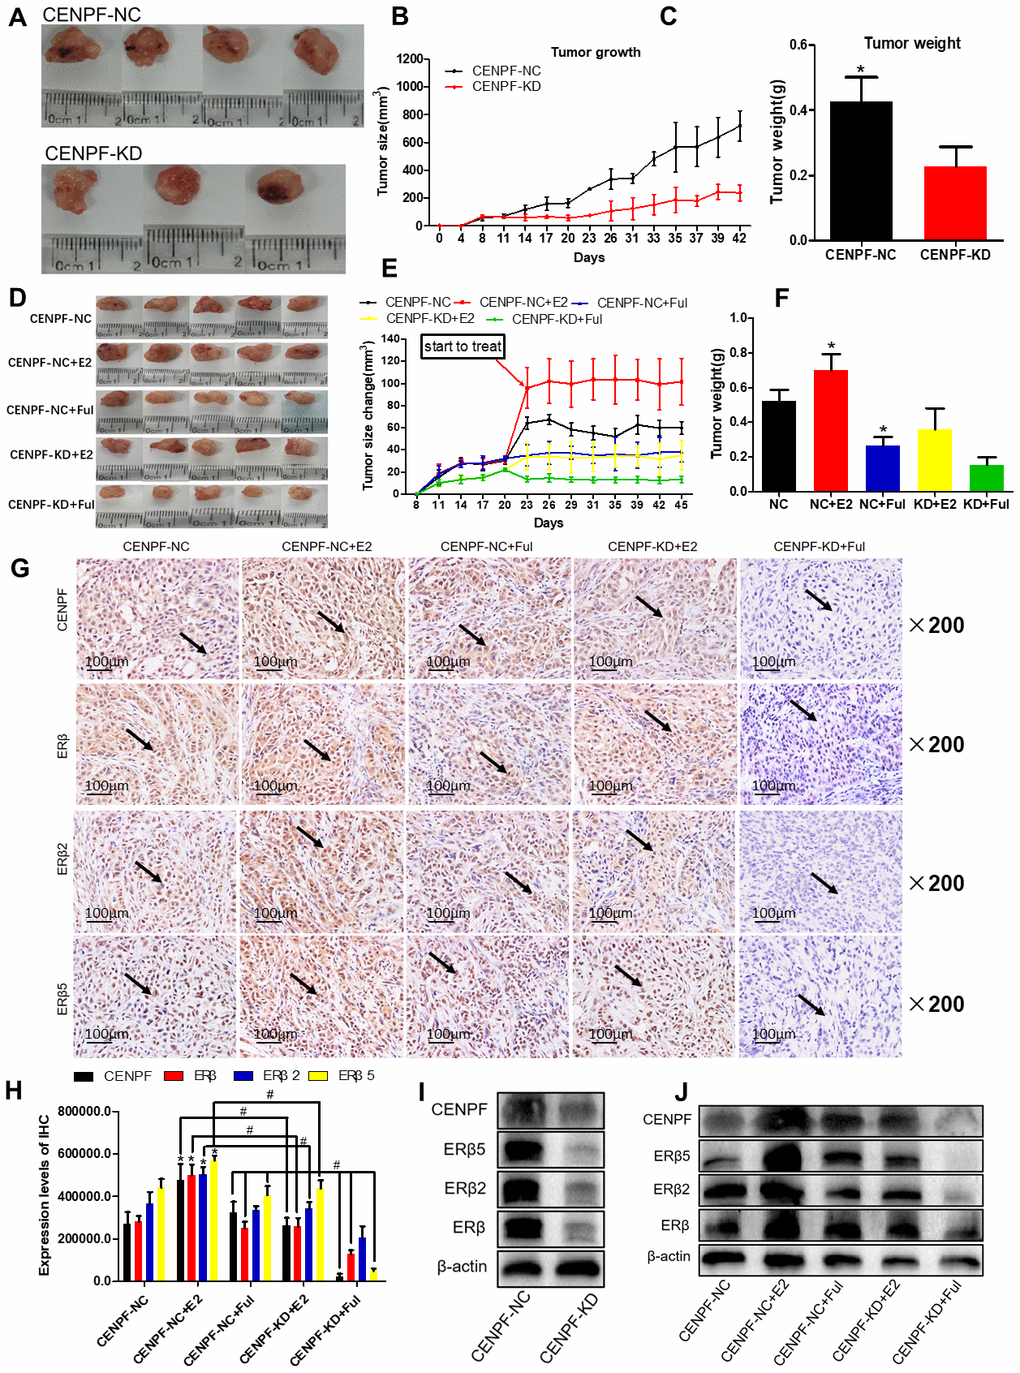 Knockdown of CENPF can inhibit ERβ2/5 pathway-mediated tumor tissue growth in vivo. (A) Pictures of mice tumor tissues after resection. (B, C) Analysis of tumor size and tumor weight. *P D) Tumor images of nude mice. (E, F) Statistical analysis of tumor size and tumor weight. (G, H) Immunohistochemical analysis of the expression of CENPF, ERβ, ERβ2 and ERβ5 in nude mice tumor tissues and corresponding quantified histograms. (I) Knockdown of CENPF inhibited the expression of ERβ2/5. (The corresponding gray value are shown in Supplementary Figure 5B). (J) Protein expression of CENPF, ERβ, ERβ1, ERβ2 and ERβ5 in vivo experiment after treated with E2 and Ful treatment (The corresponding gray value are shown in Supplementary Figure 5F). *P 